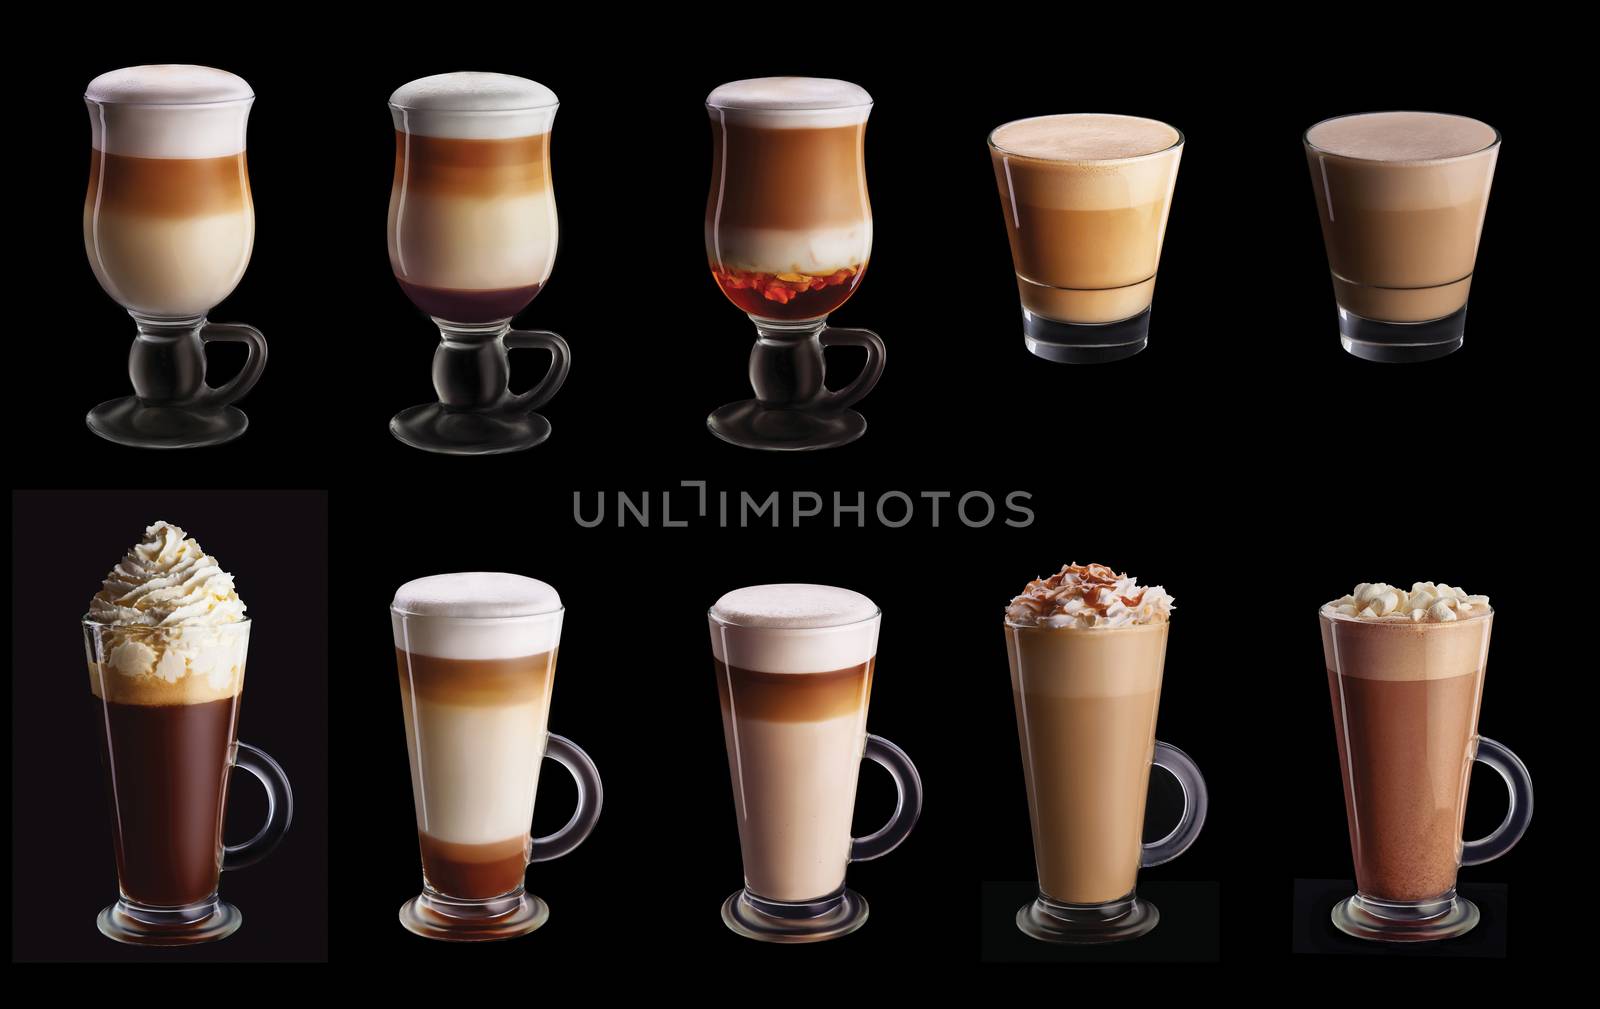 Ten coffee coctails collage set isolated on black background